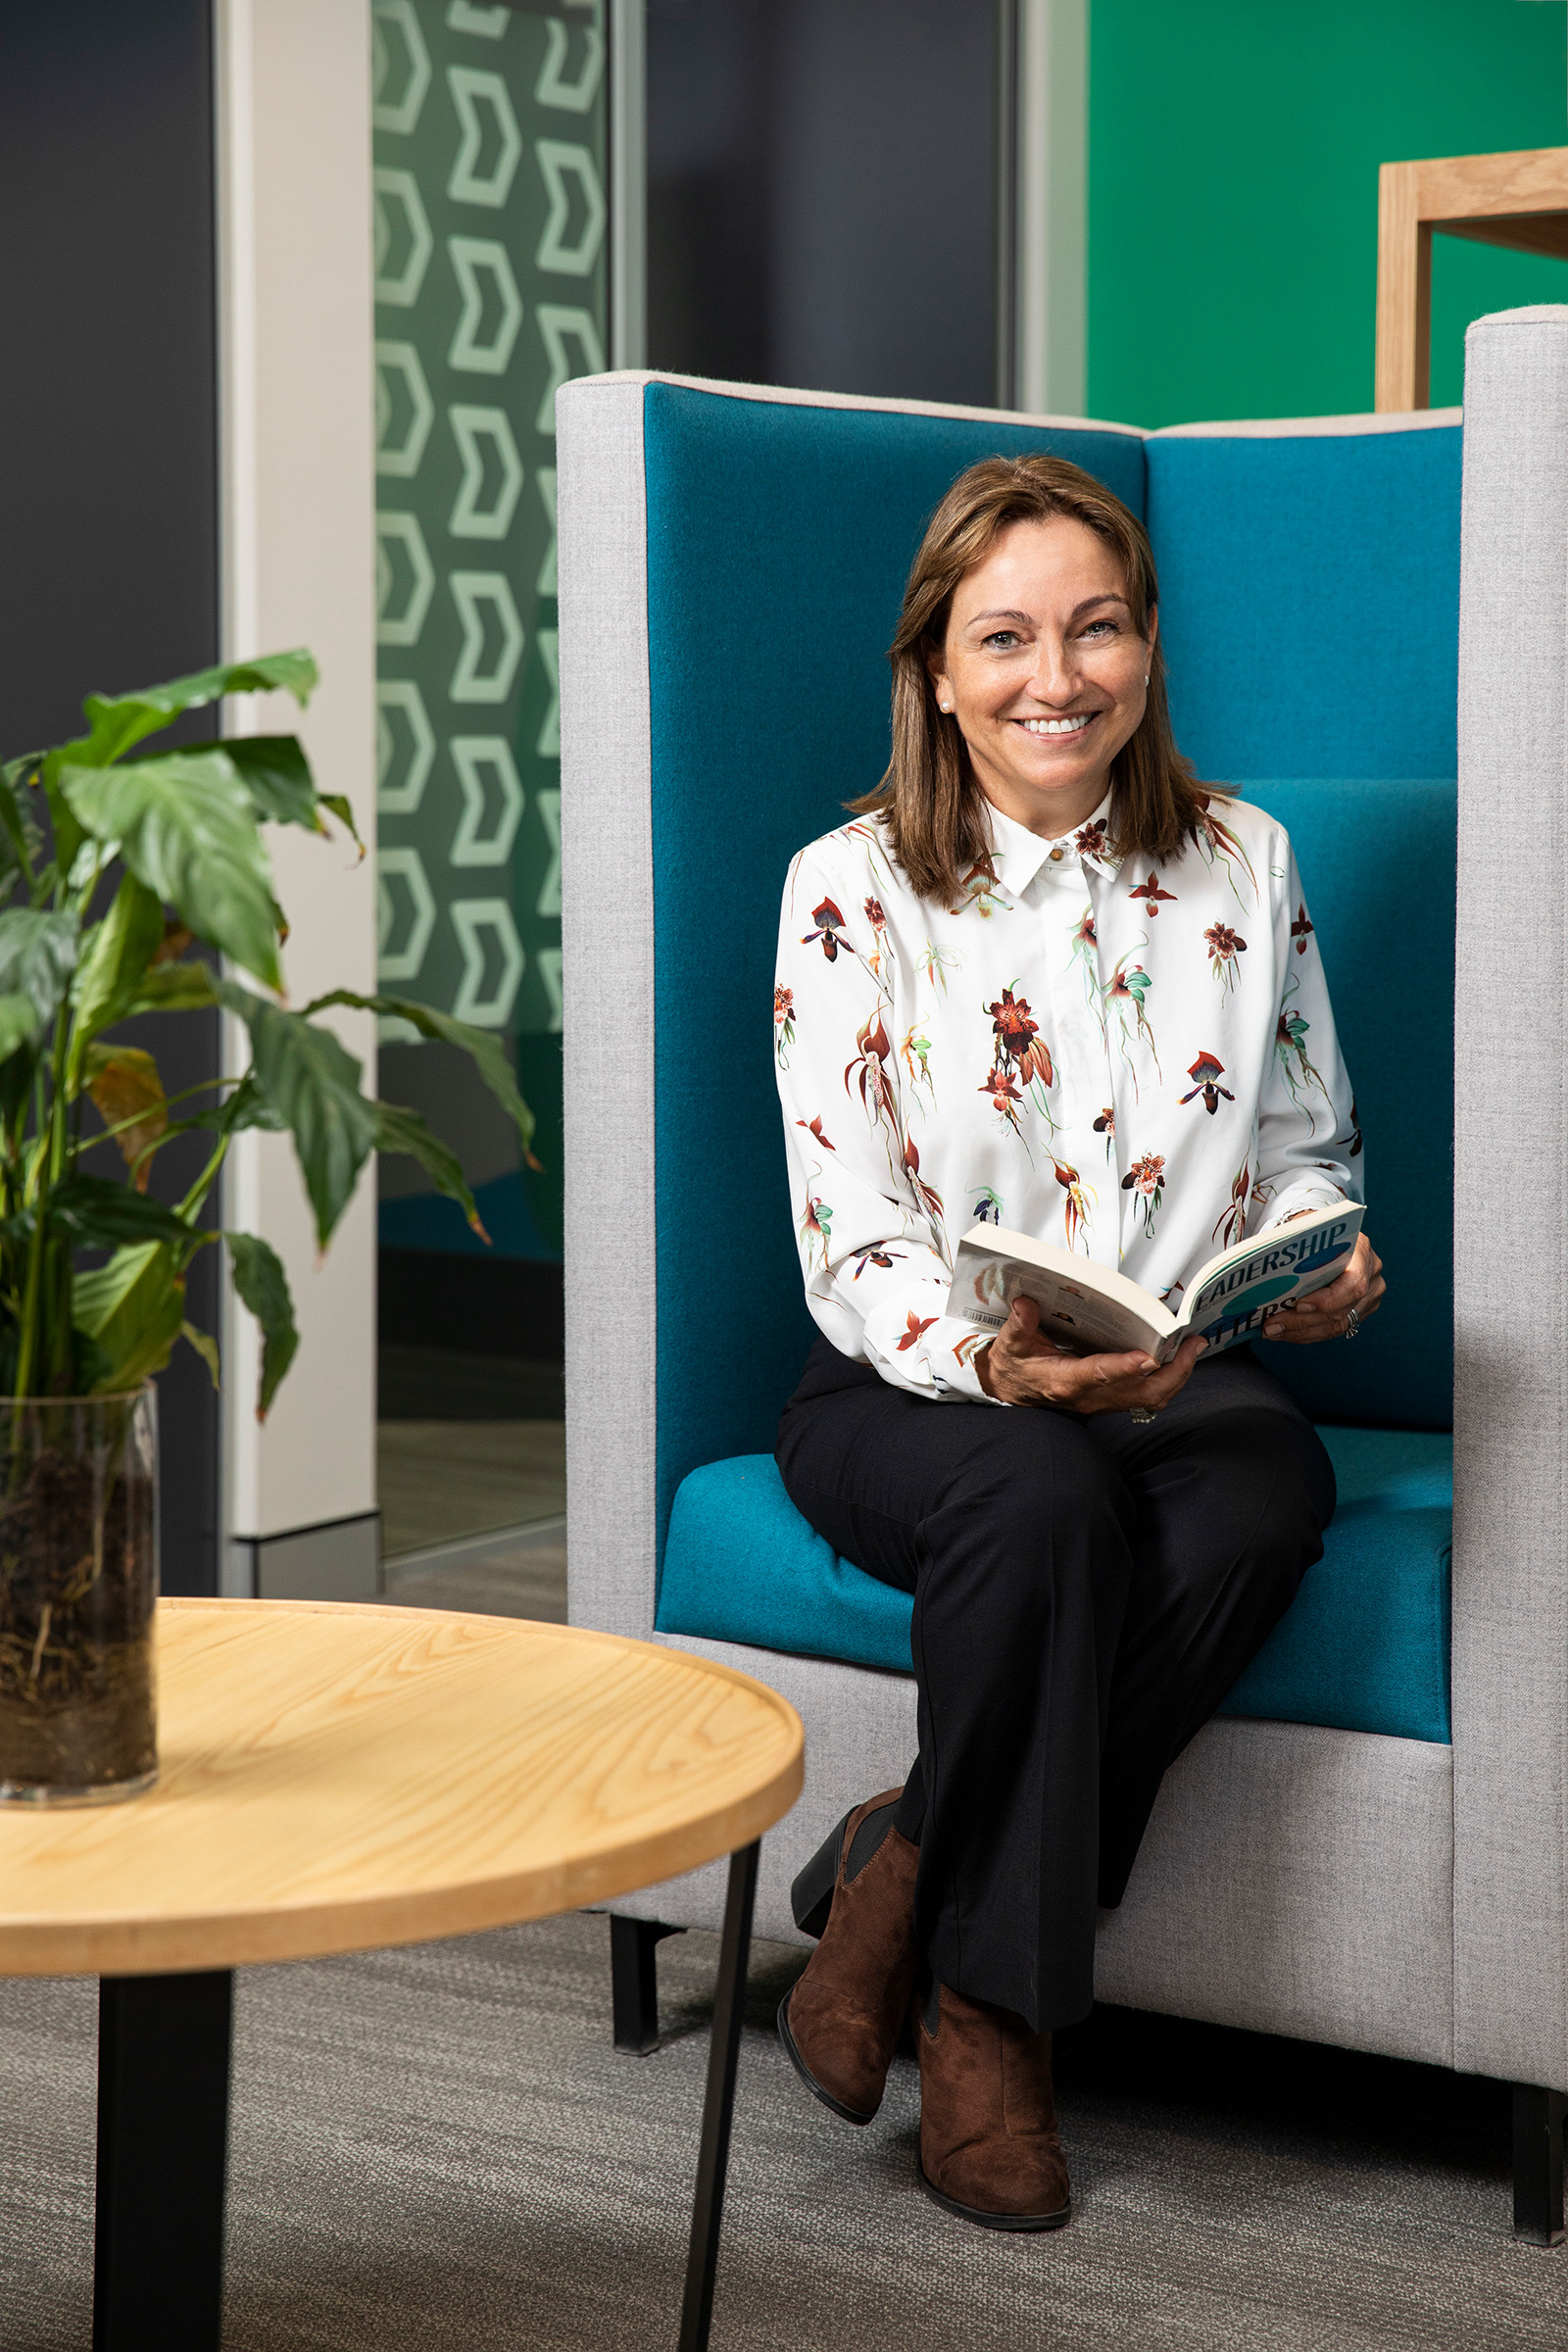 Corporate environmental corporate photography of smiling female sitting in reception area reading a book